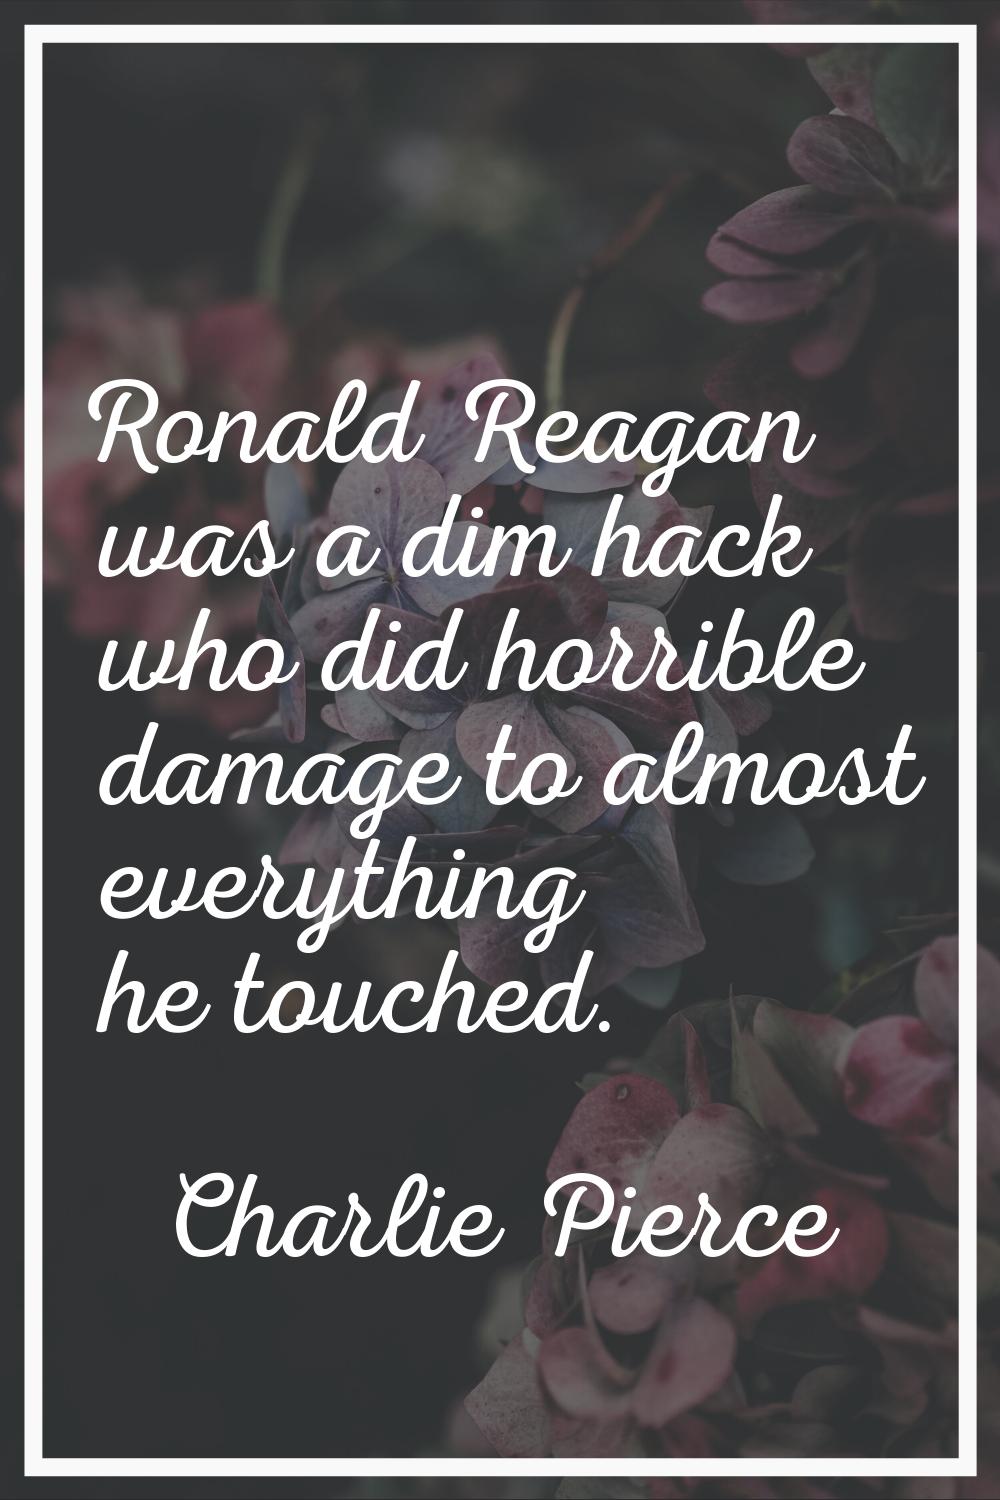 Ronald Reagan was a dim hack who did horrible damage to almost everything he touched.